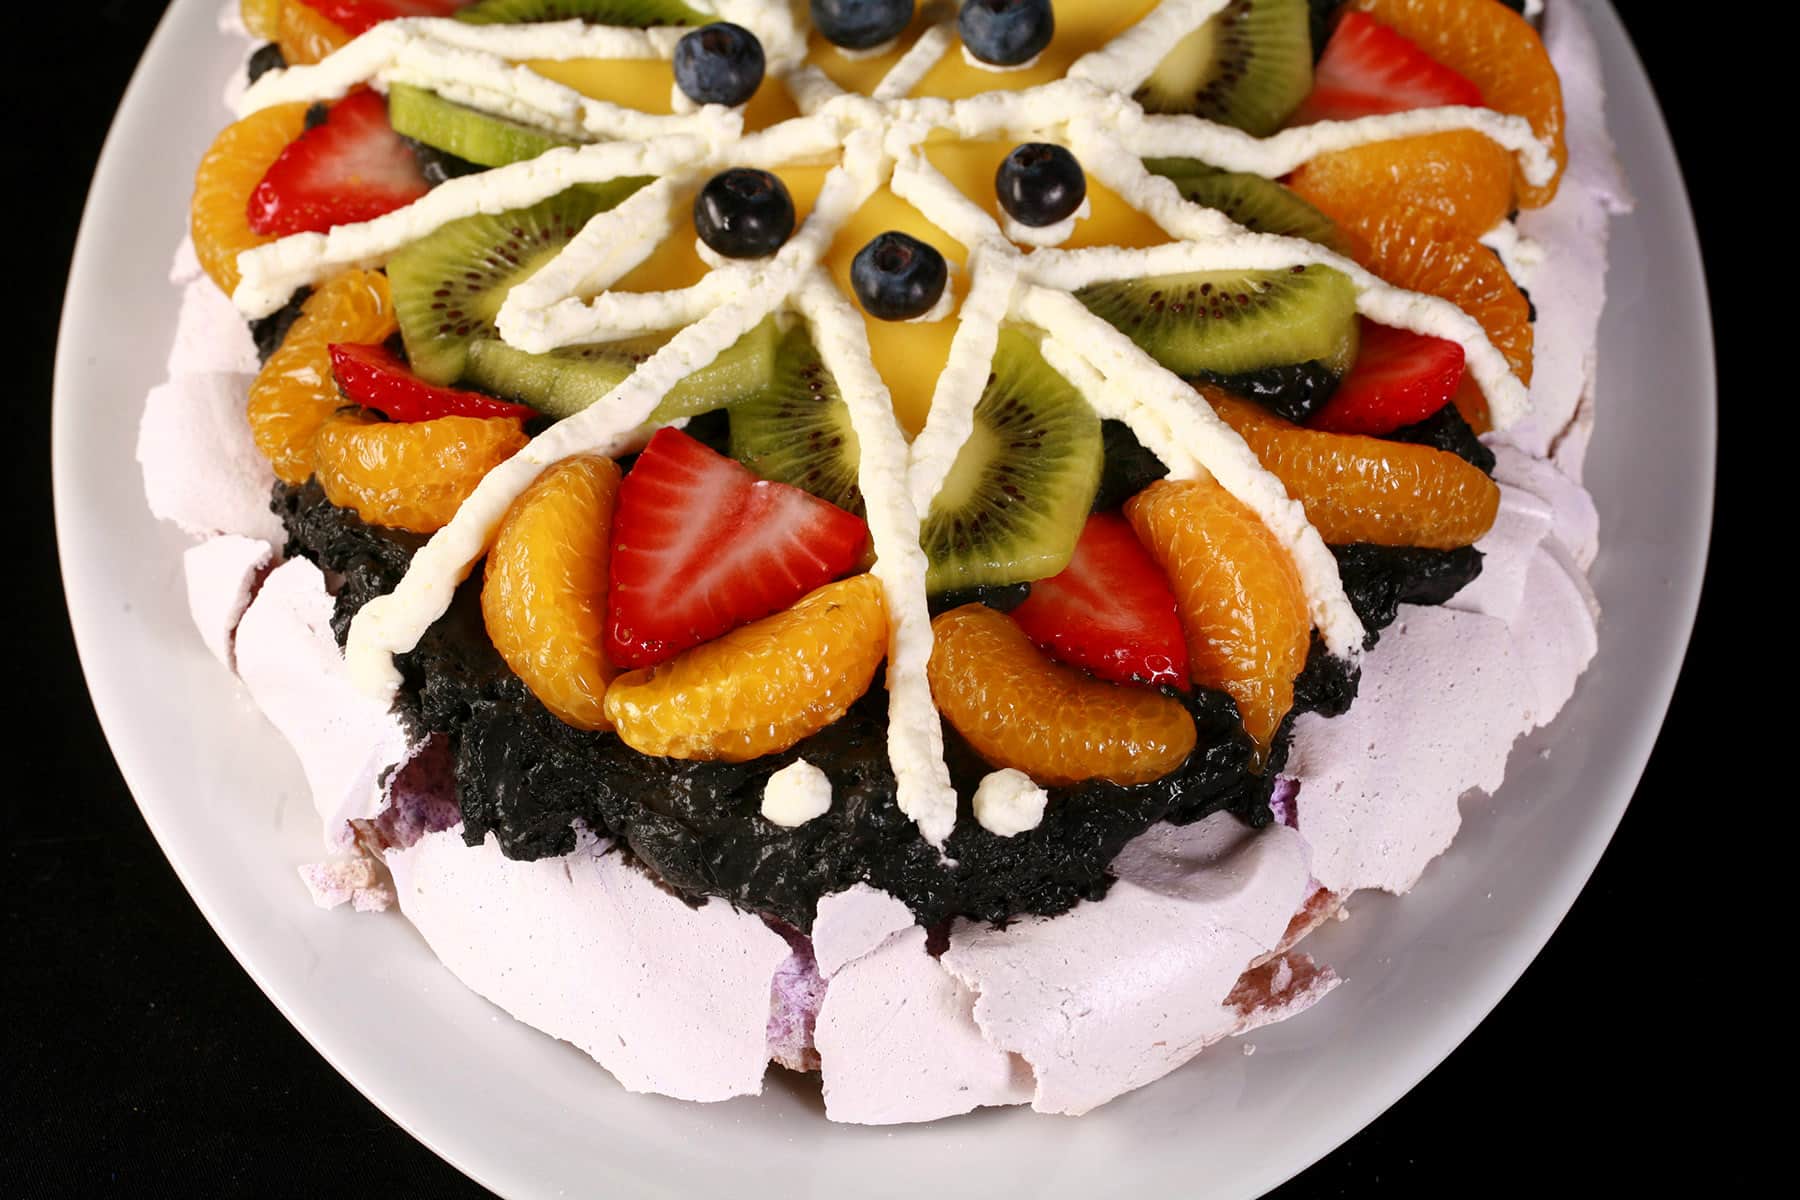 An oval shaped Easter pavlova decorated with fruit to look like a pysanky egg.